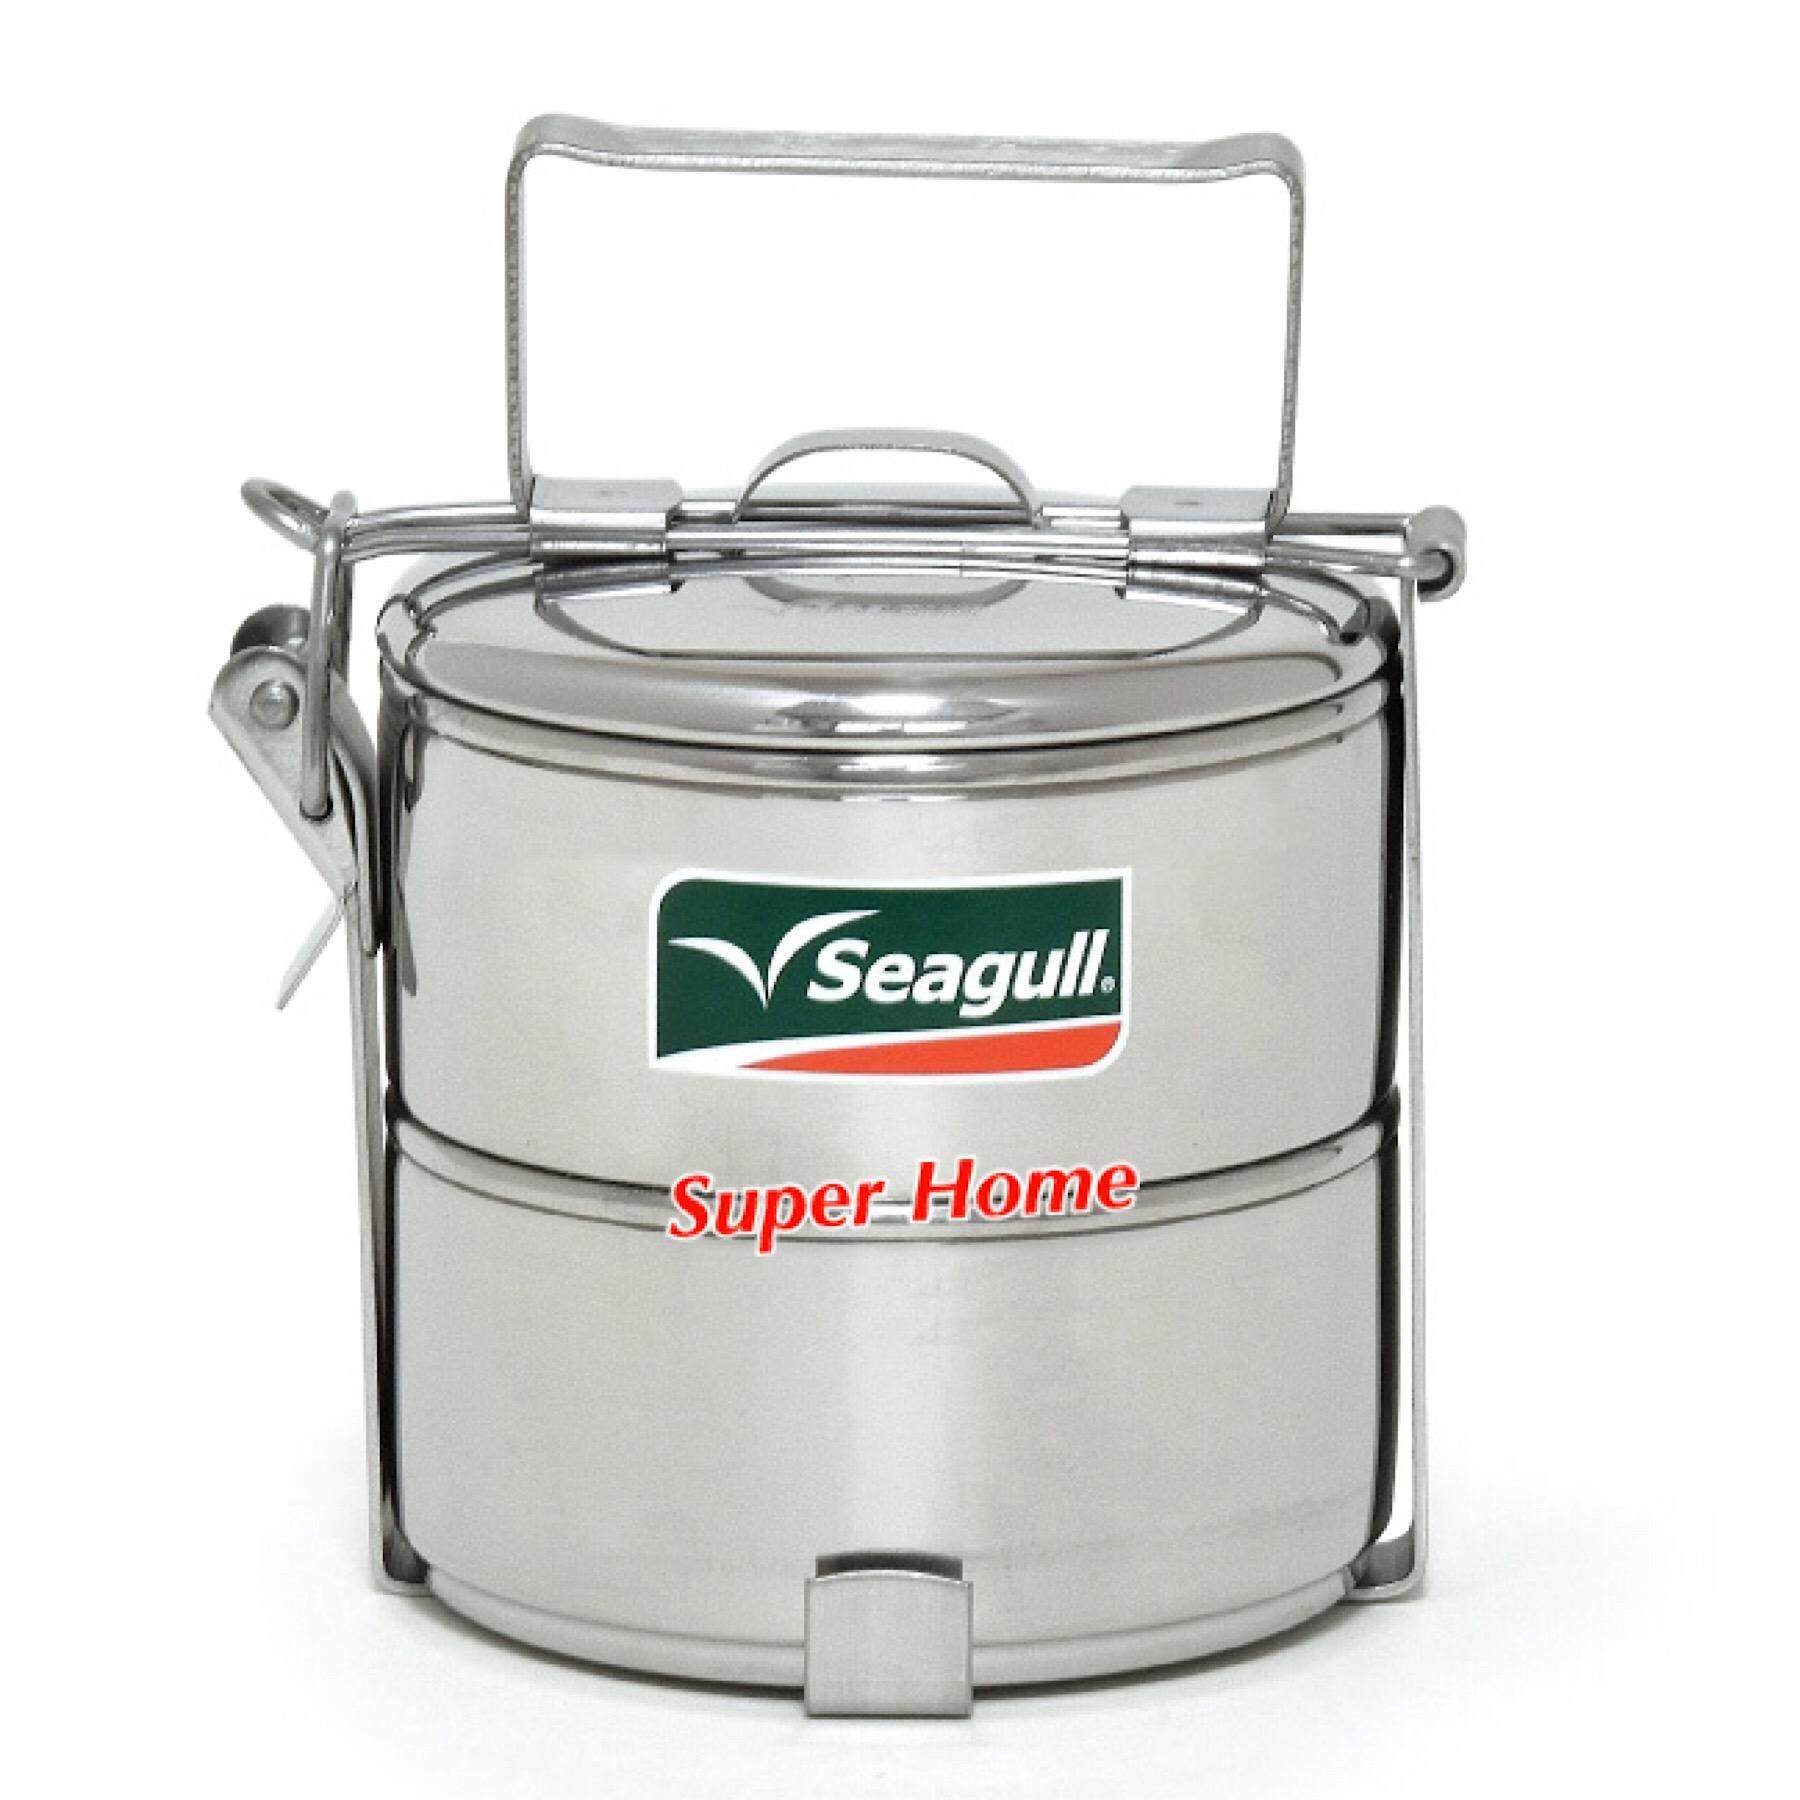 Seagull 14cm 2 tier Food Carrier (made in Thailand) (Daikin's Special Edition)